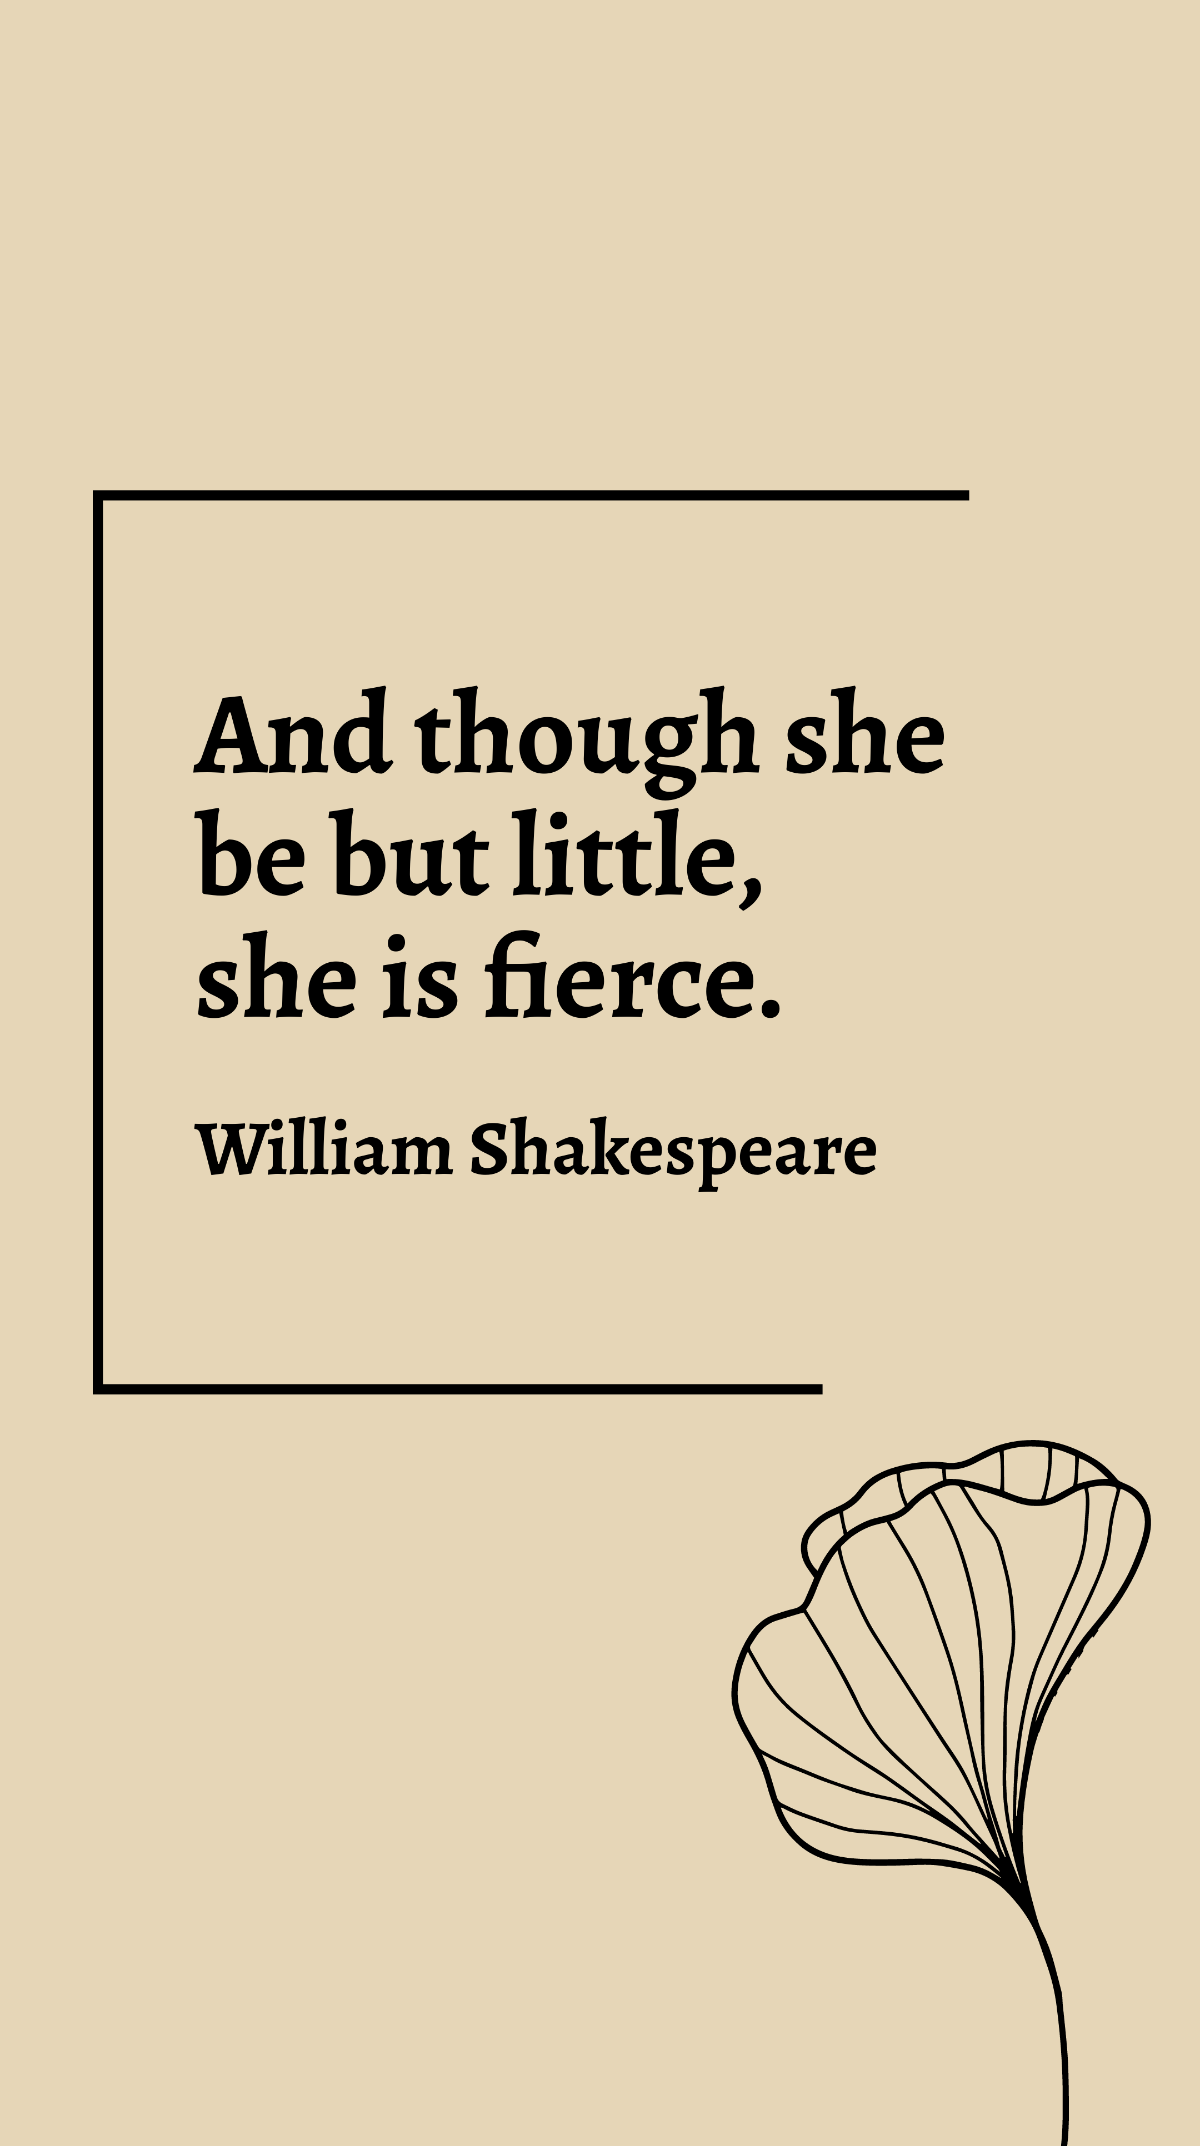 Free William Shakespeare - And though she be but little, she is fierce. Template